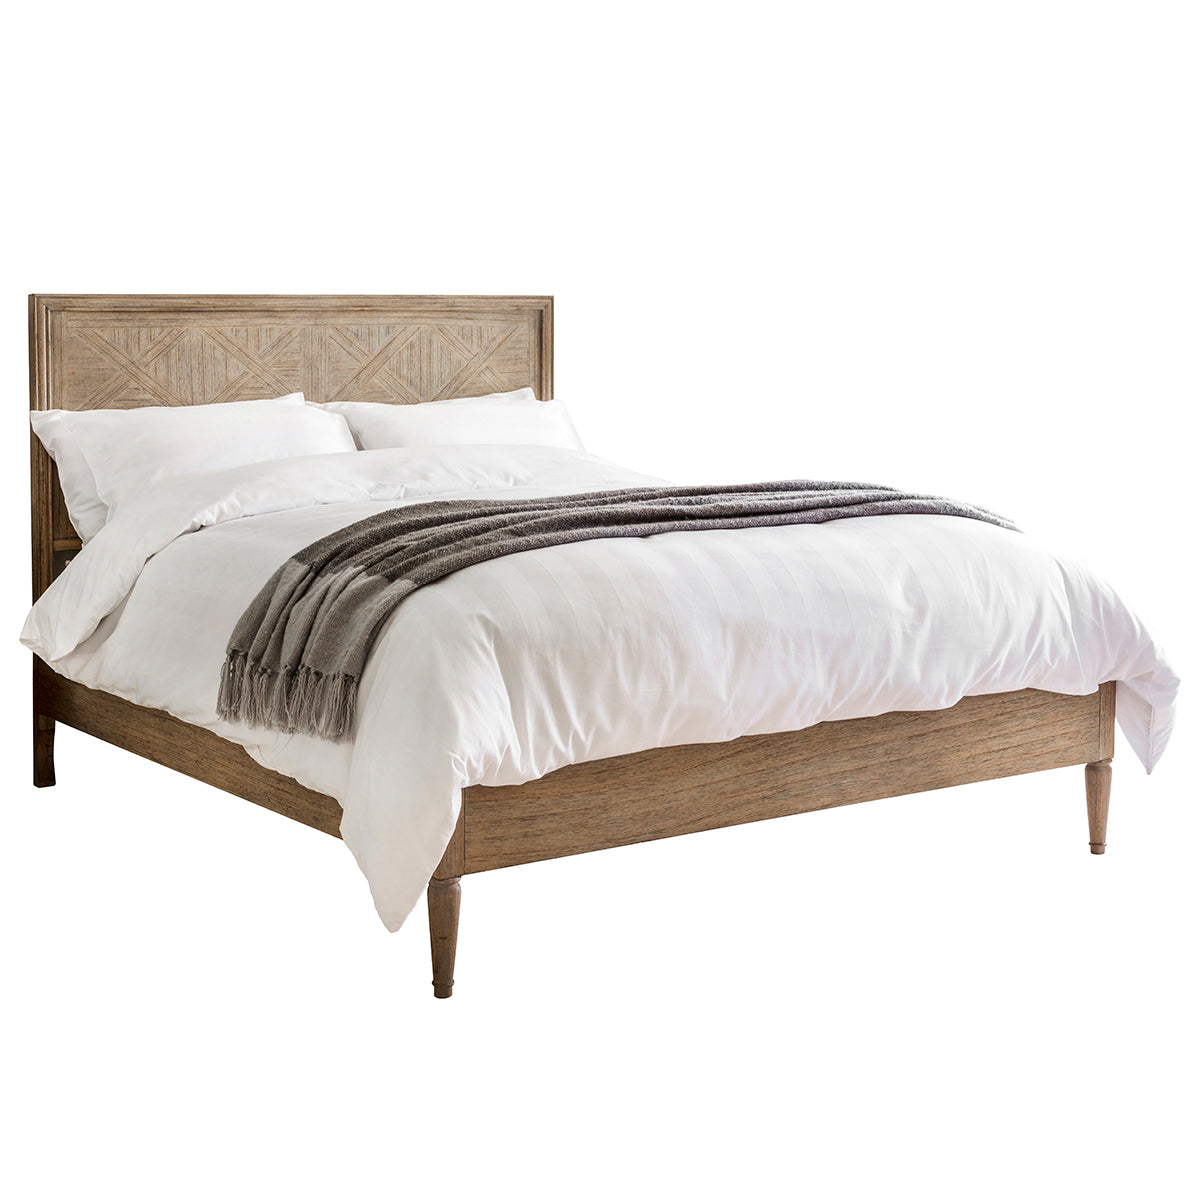 A Belsford 6' Bed with a wooden frame and a white comforter for home furniture or interior decor from Kikiathome.co.uk.